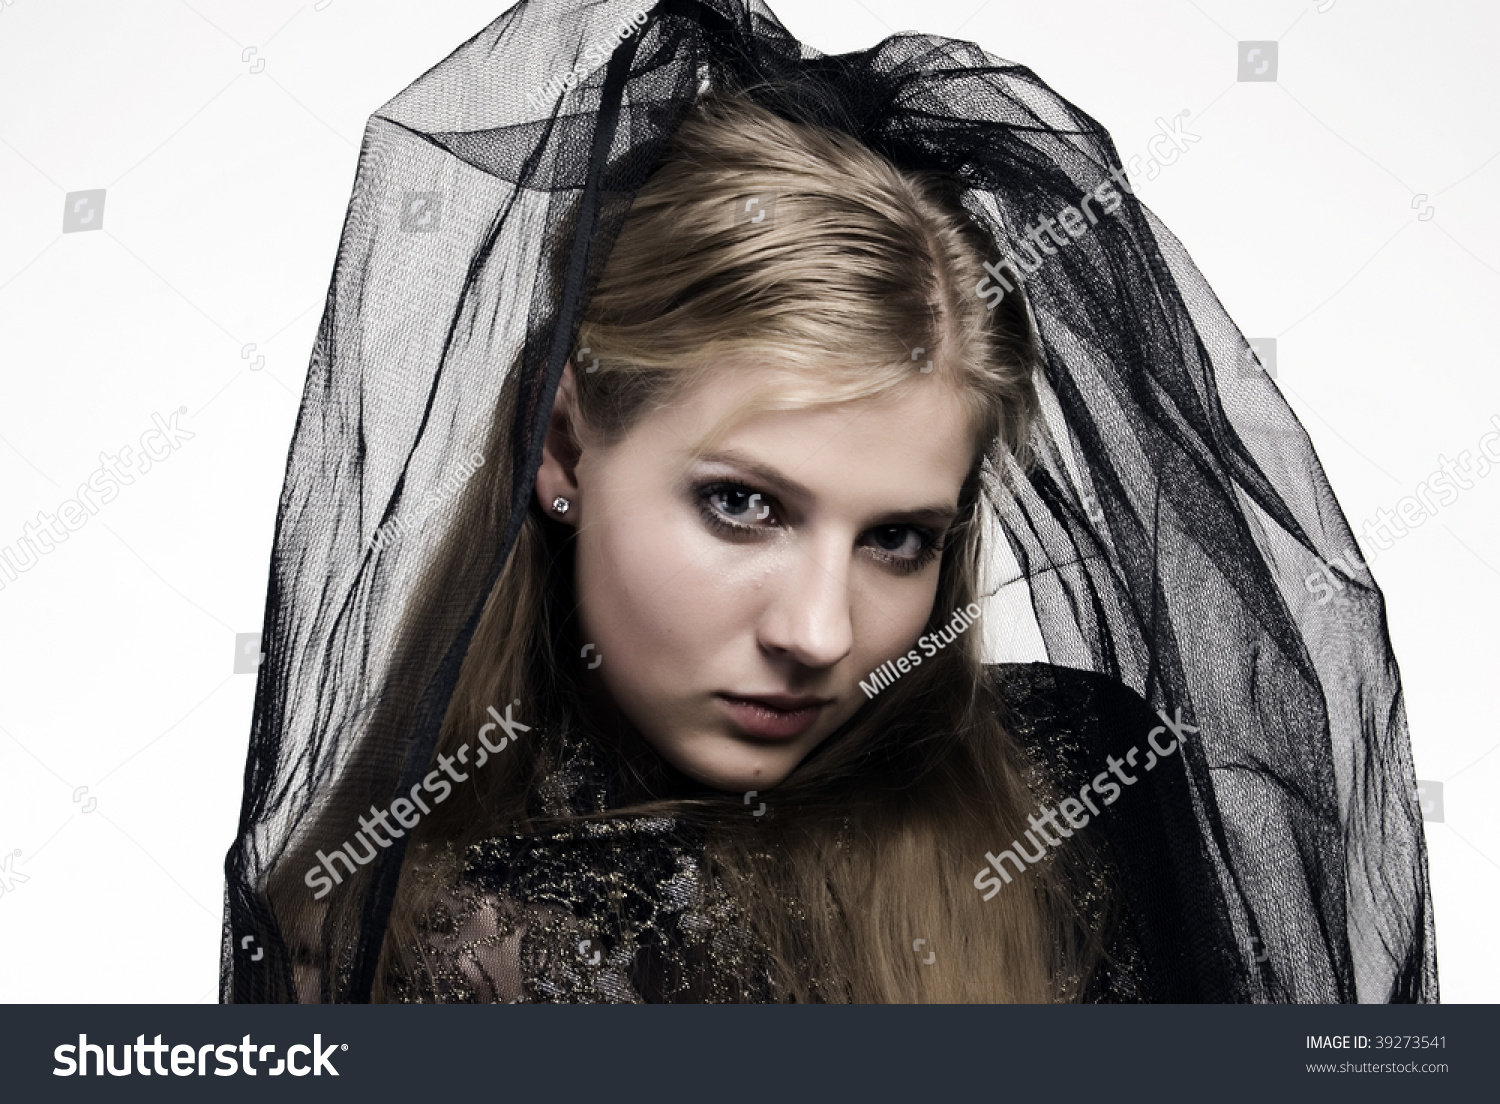 Young Gothic Woman Portrait - Gothic Bride Stock Photo 39273541